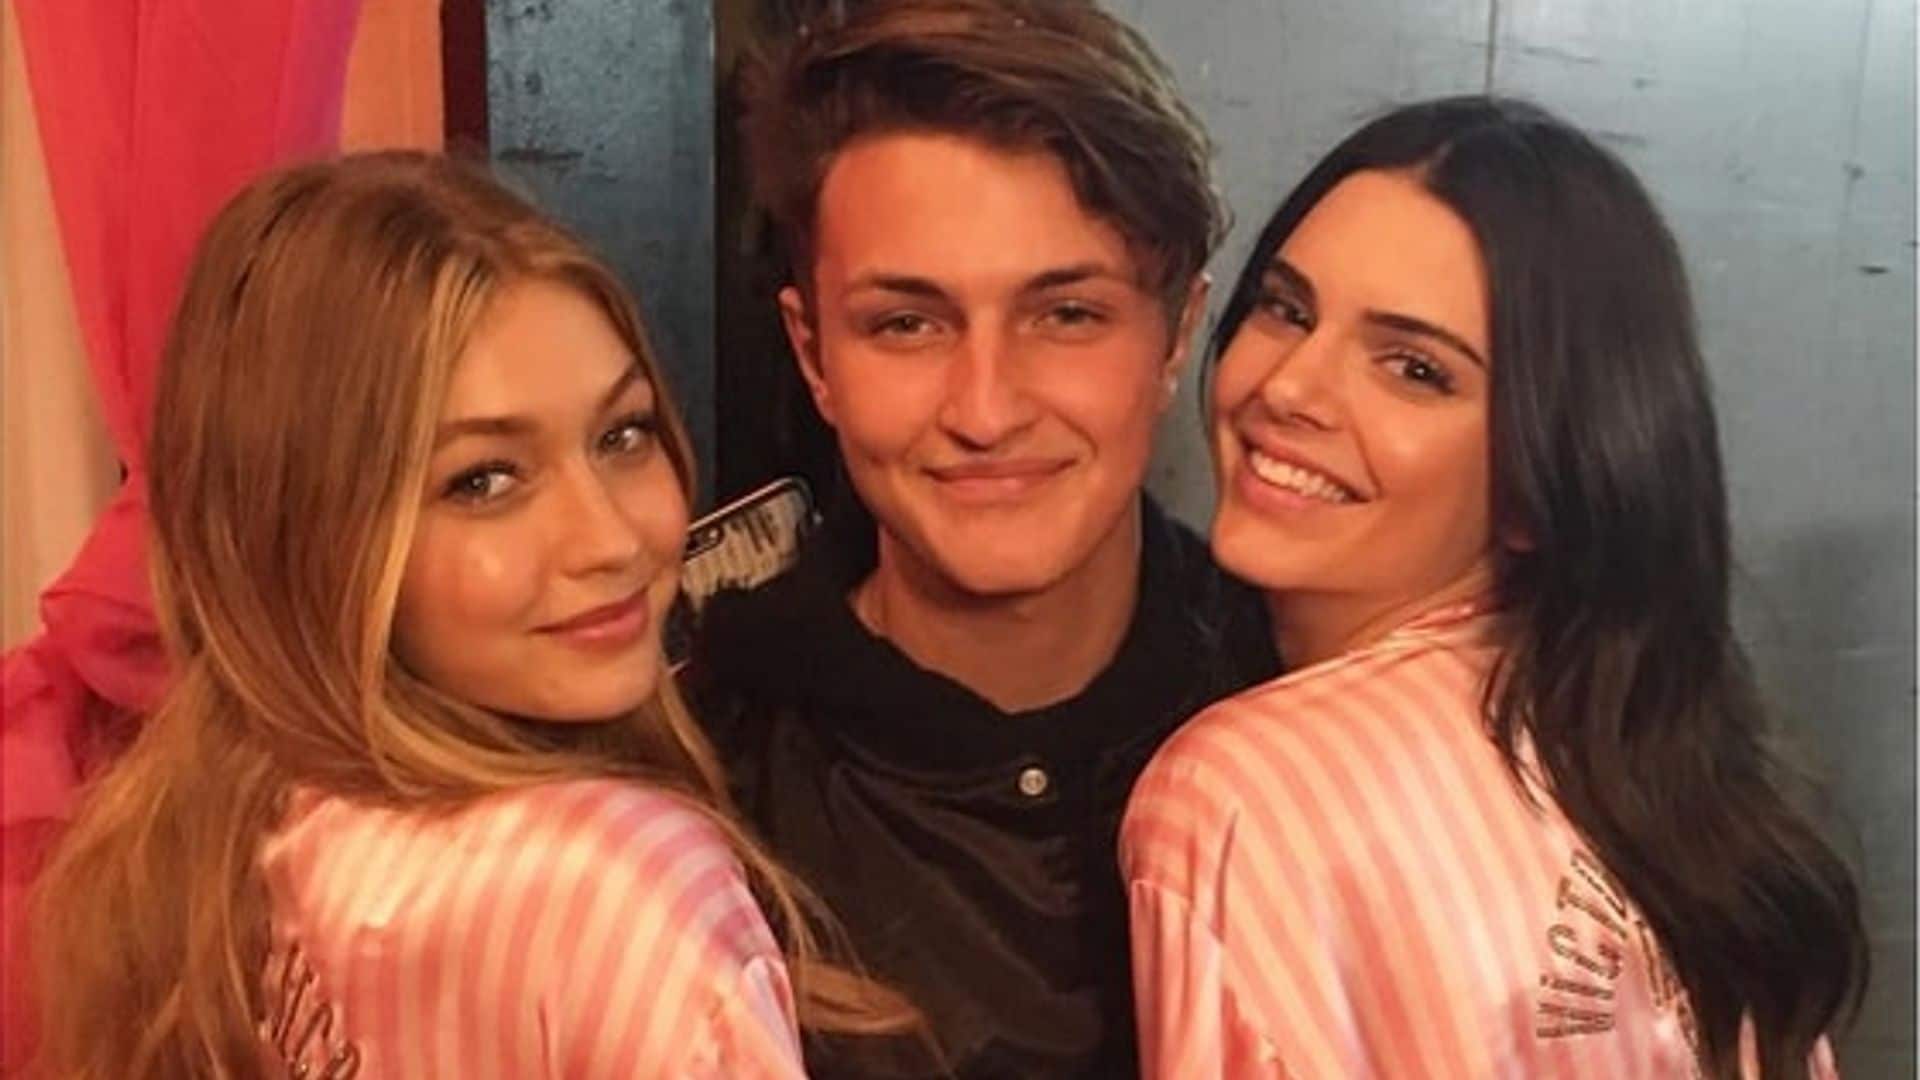 Yolanda posted this snap of daughter Gigi, son Anwar and Kendall Jenner with the caption: "What an incredible secret night...... #ProudMommy #Grateful #BucketList."
Photo: Instagram/@yolandahfoster